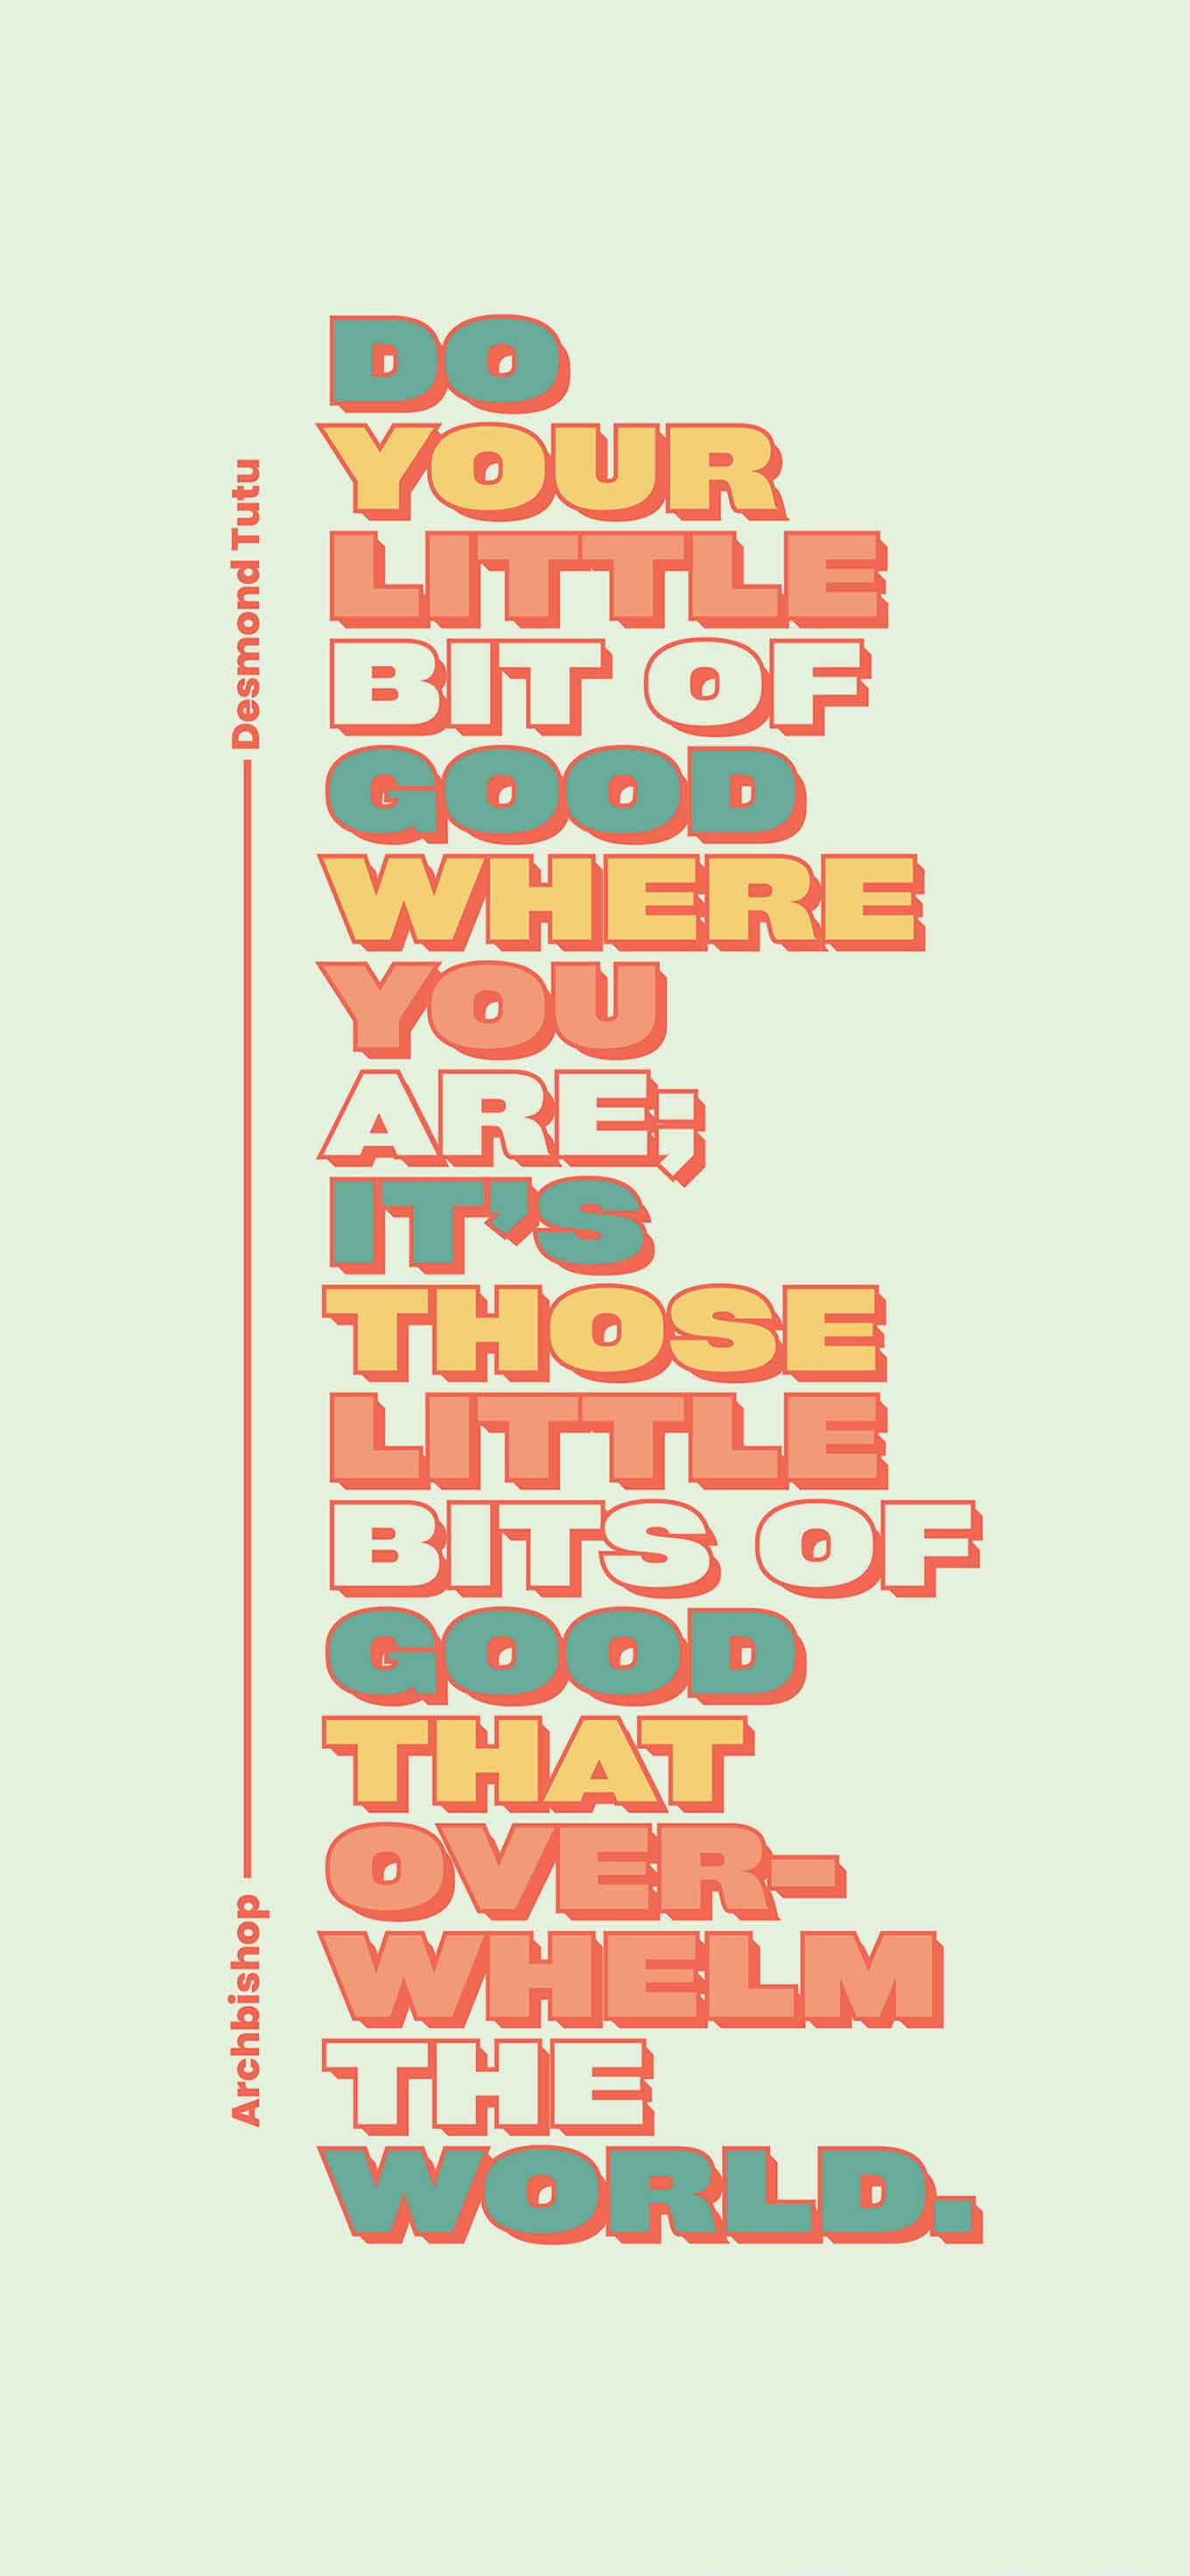 Quote: “Do your little bit of good where you are; it is those little bits of good put together that overwhelm the world.” — Archbishop Desmond Tutu